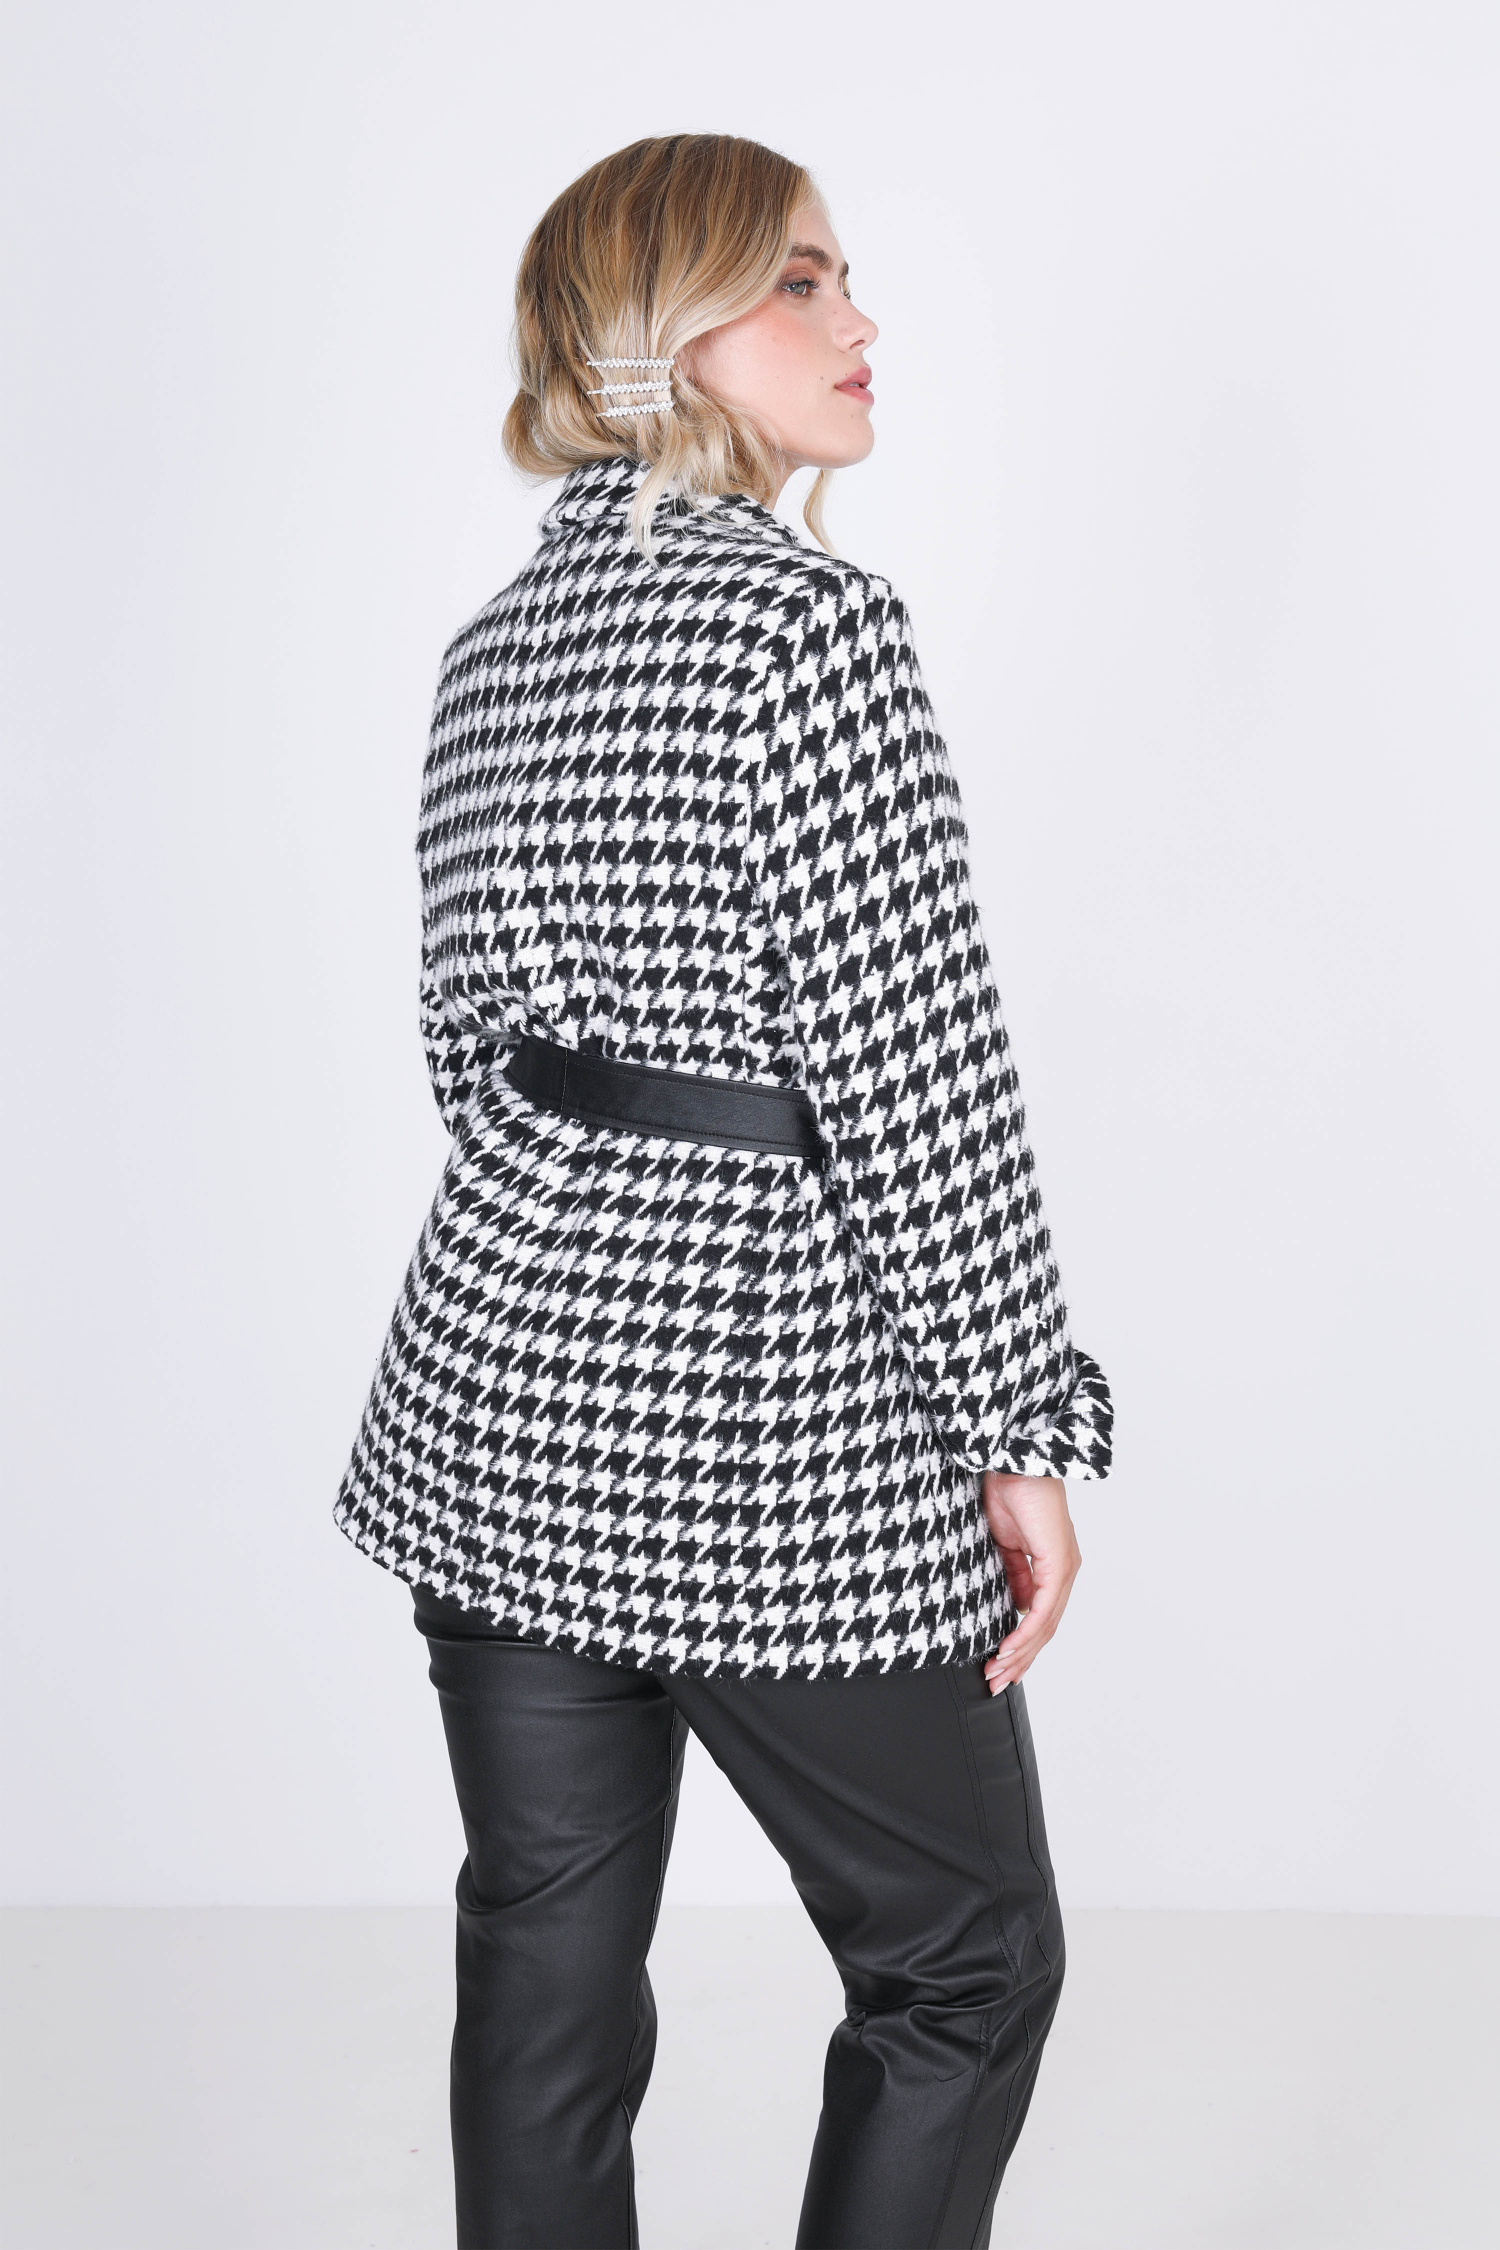 Tailored jacket with houndstooth print and vegan leather